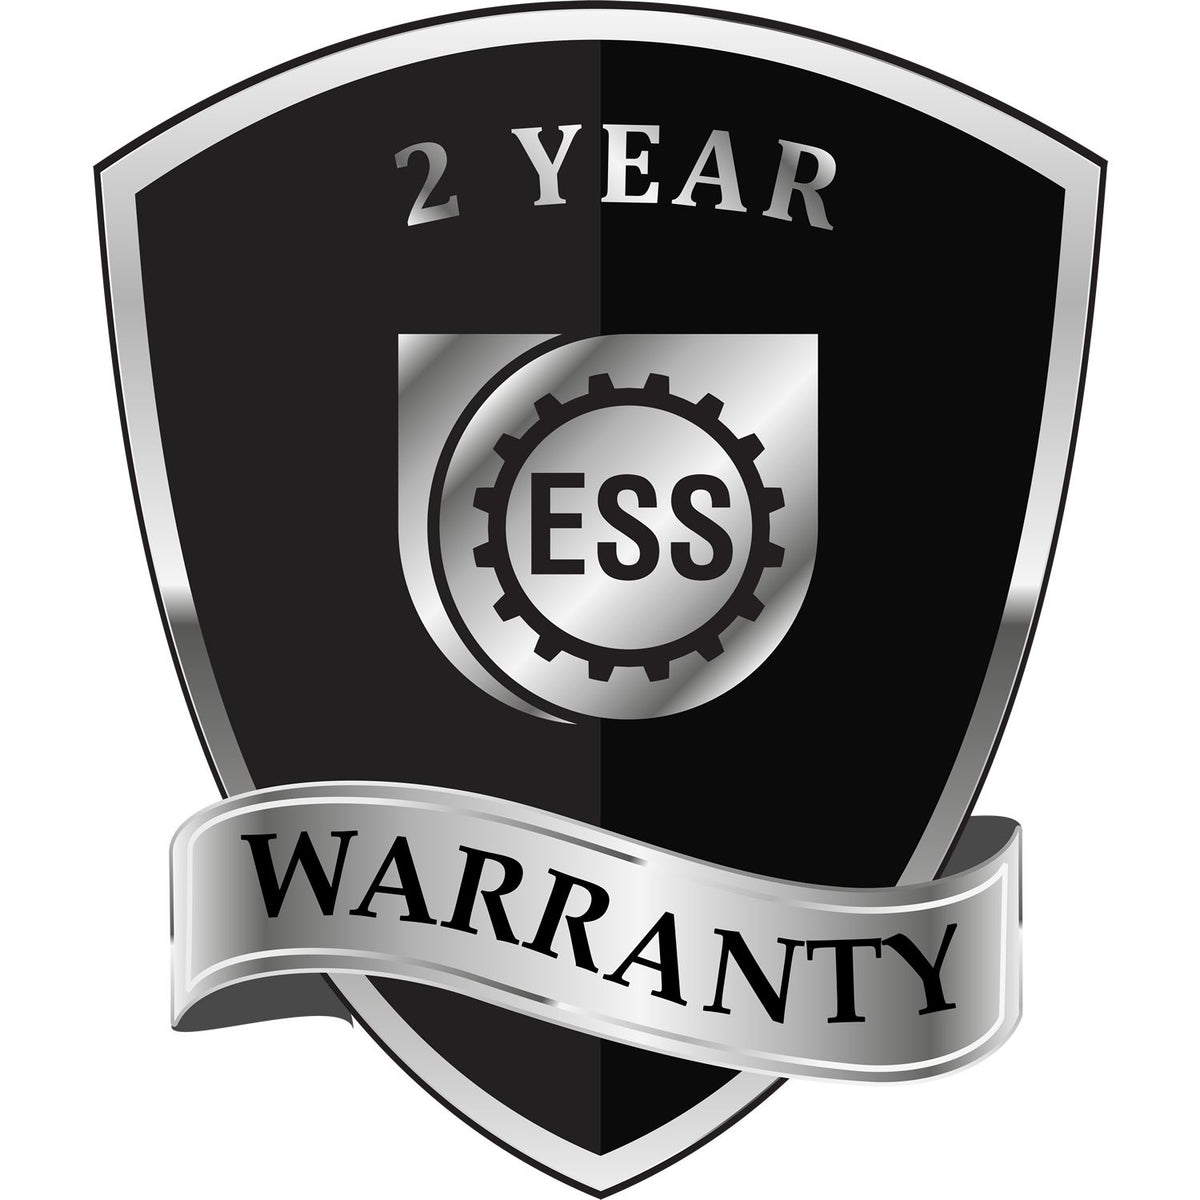 A black and silver badge or emblem showing warranty information for the Soft Massachusetts Professional Geologist Seal